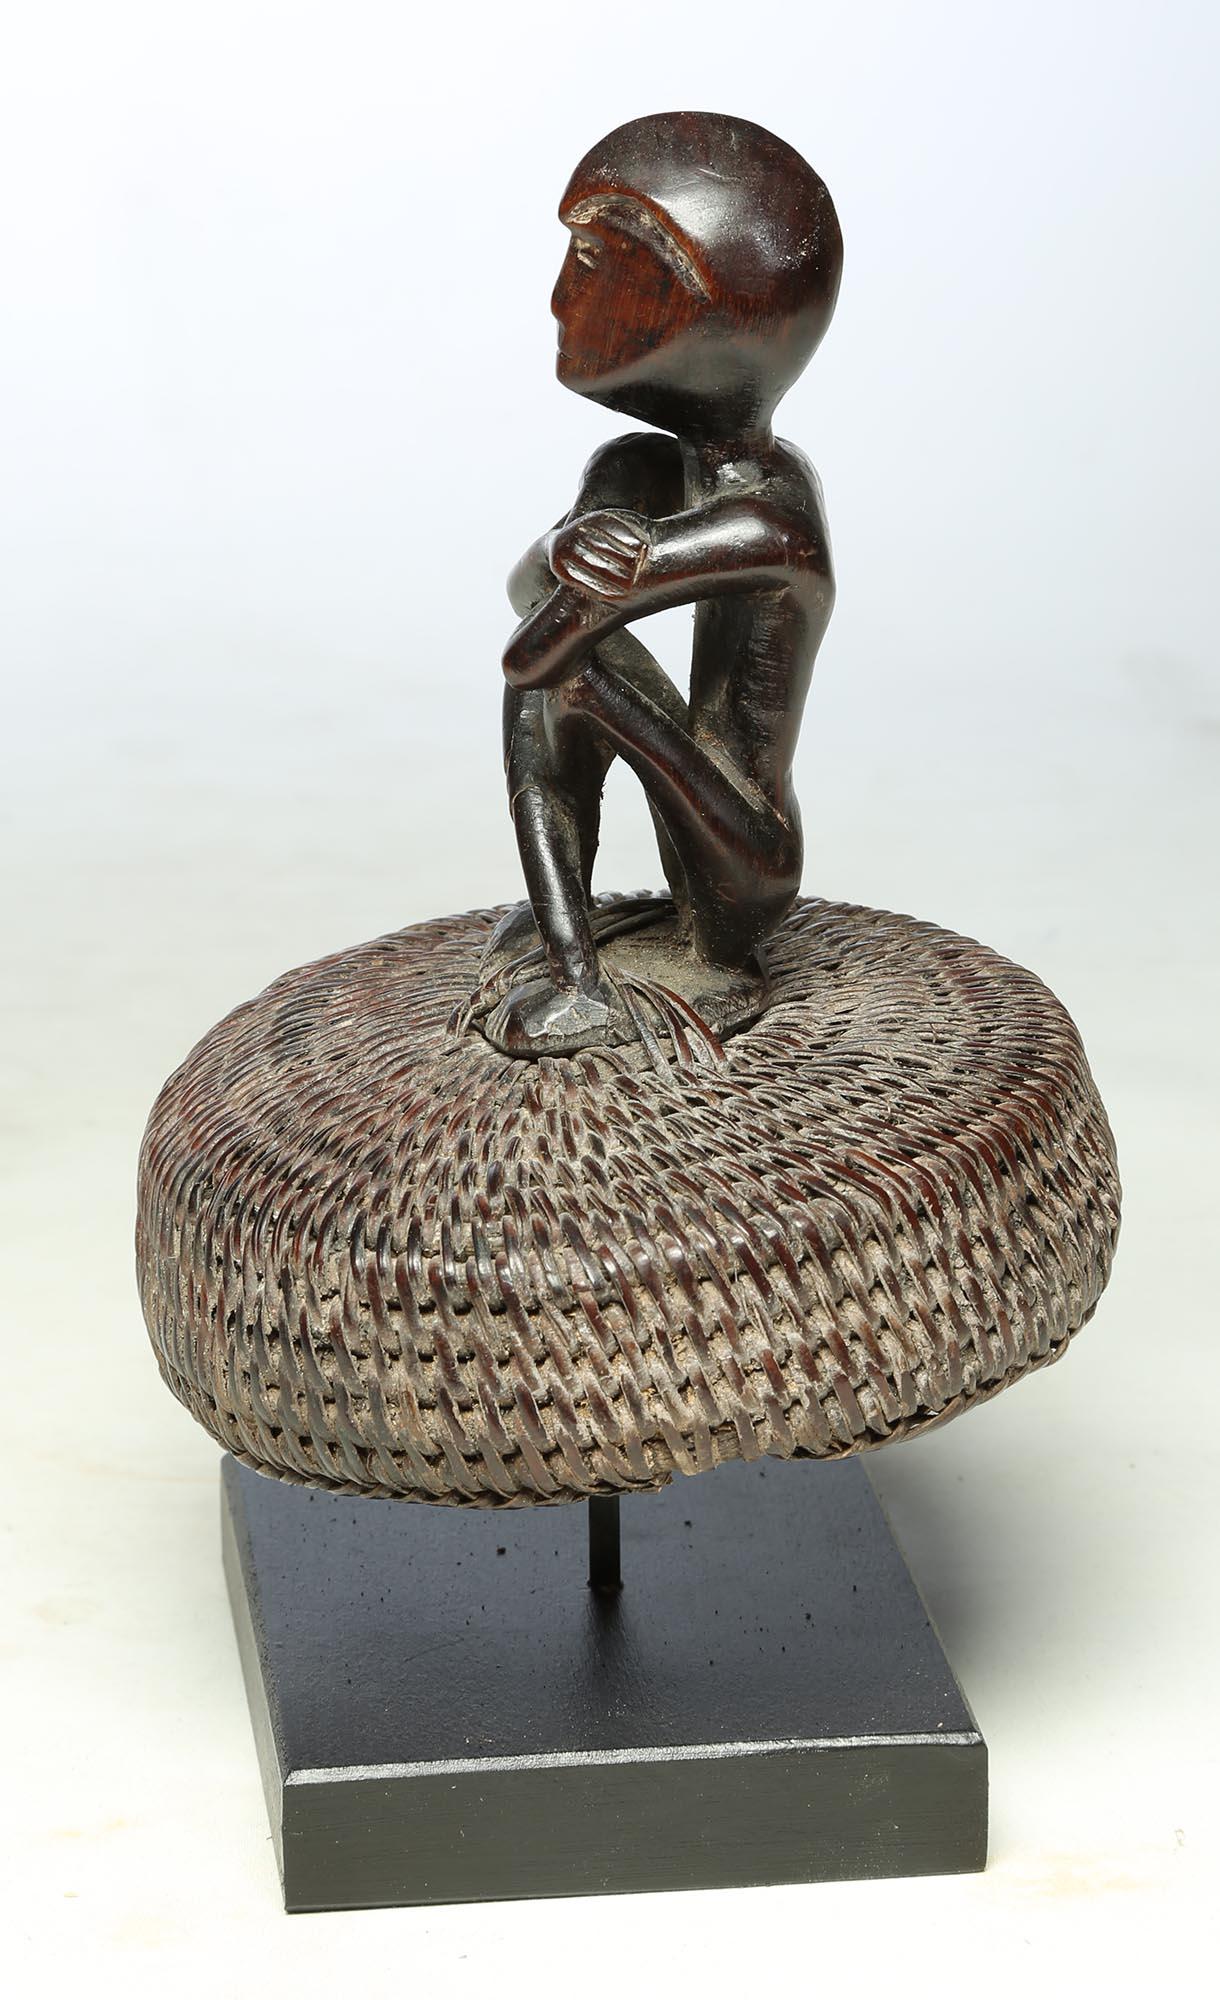 Carved wood seated Philippine miniature Bulul figure sitting and attached to the top of an old hat or basket lid with crossed arms. Worn and polished surface. Measure: figure alone 4 1/2 inches high, figure & basket 6 1/2 inches, on custom wood and